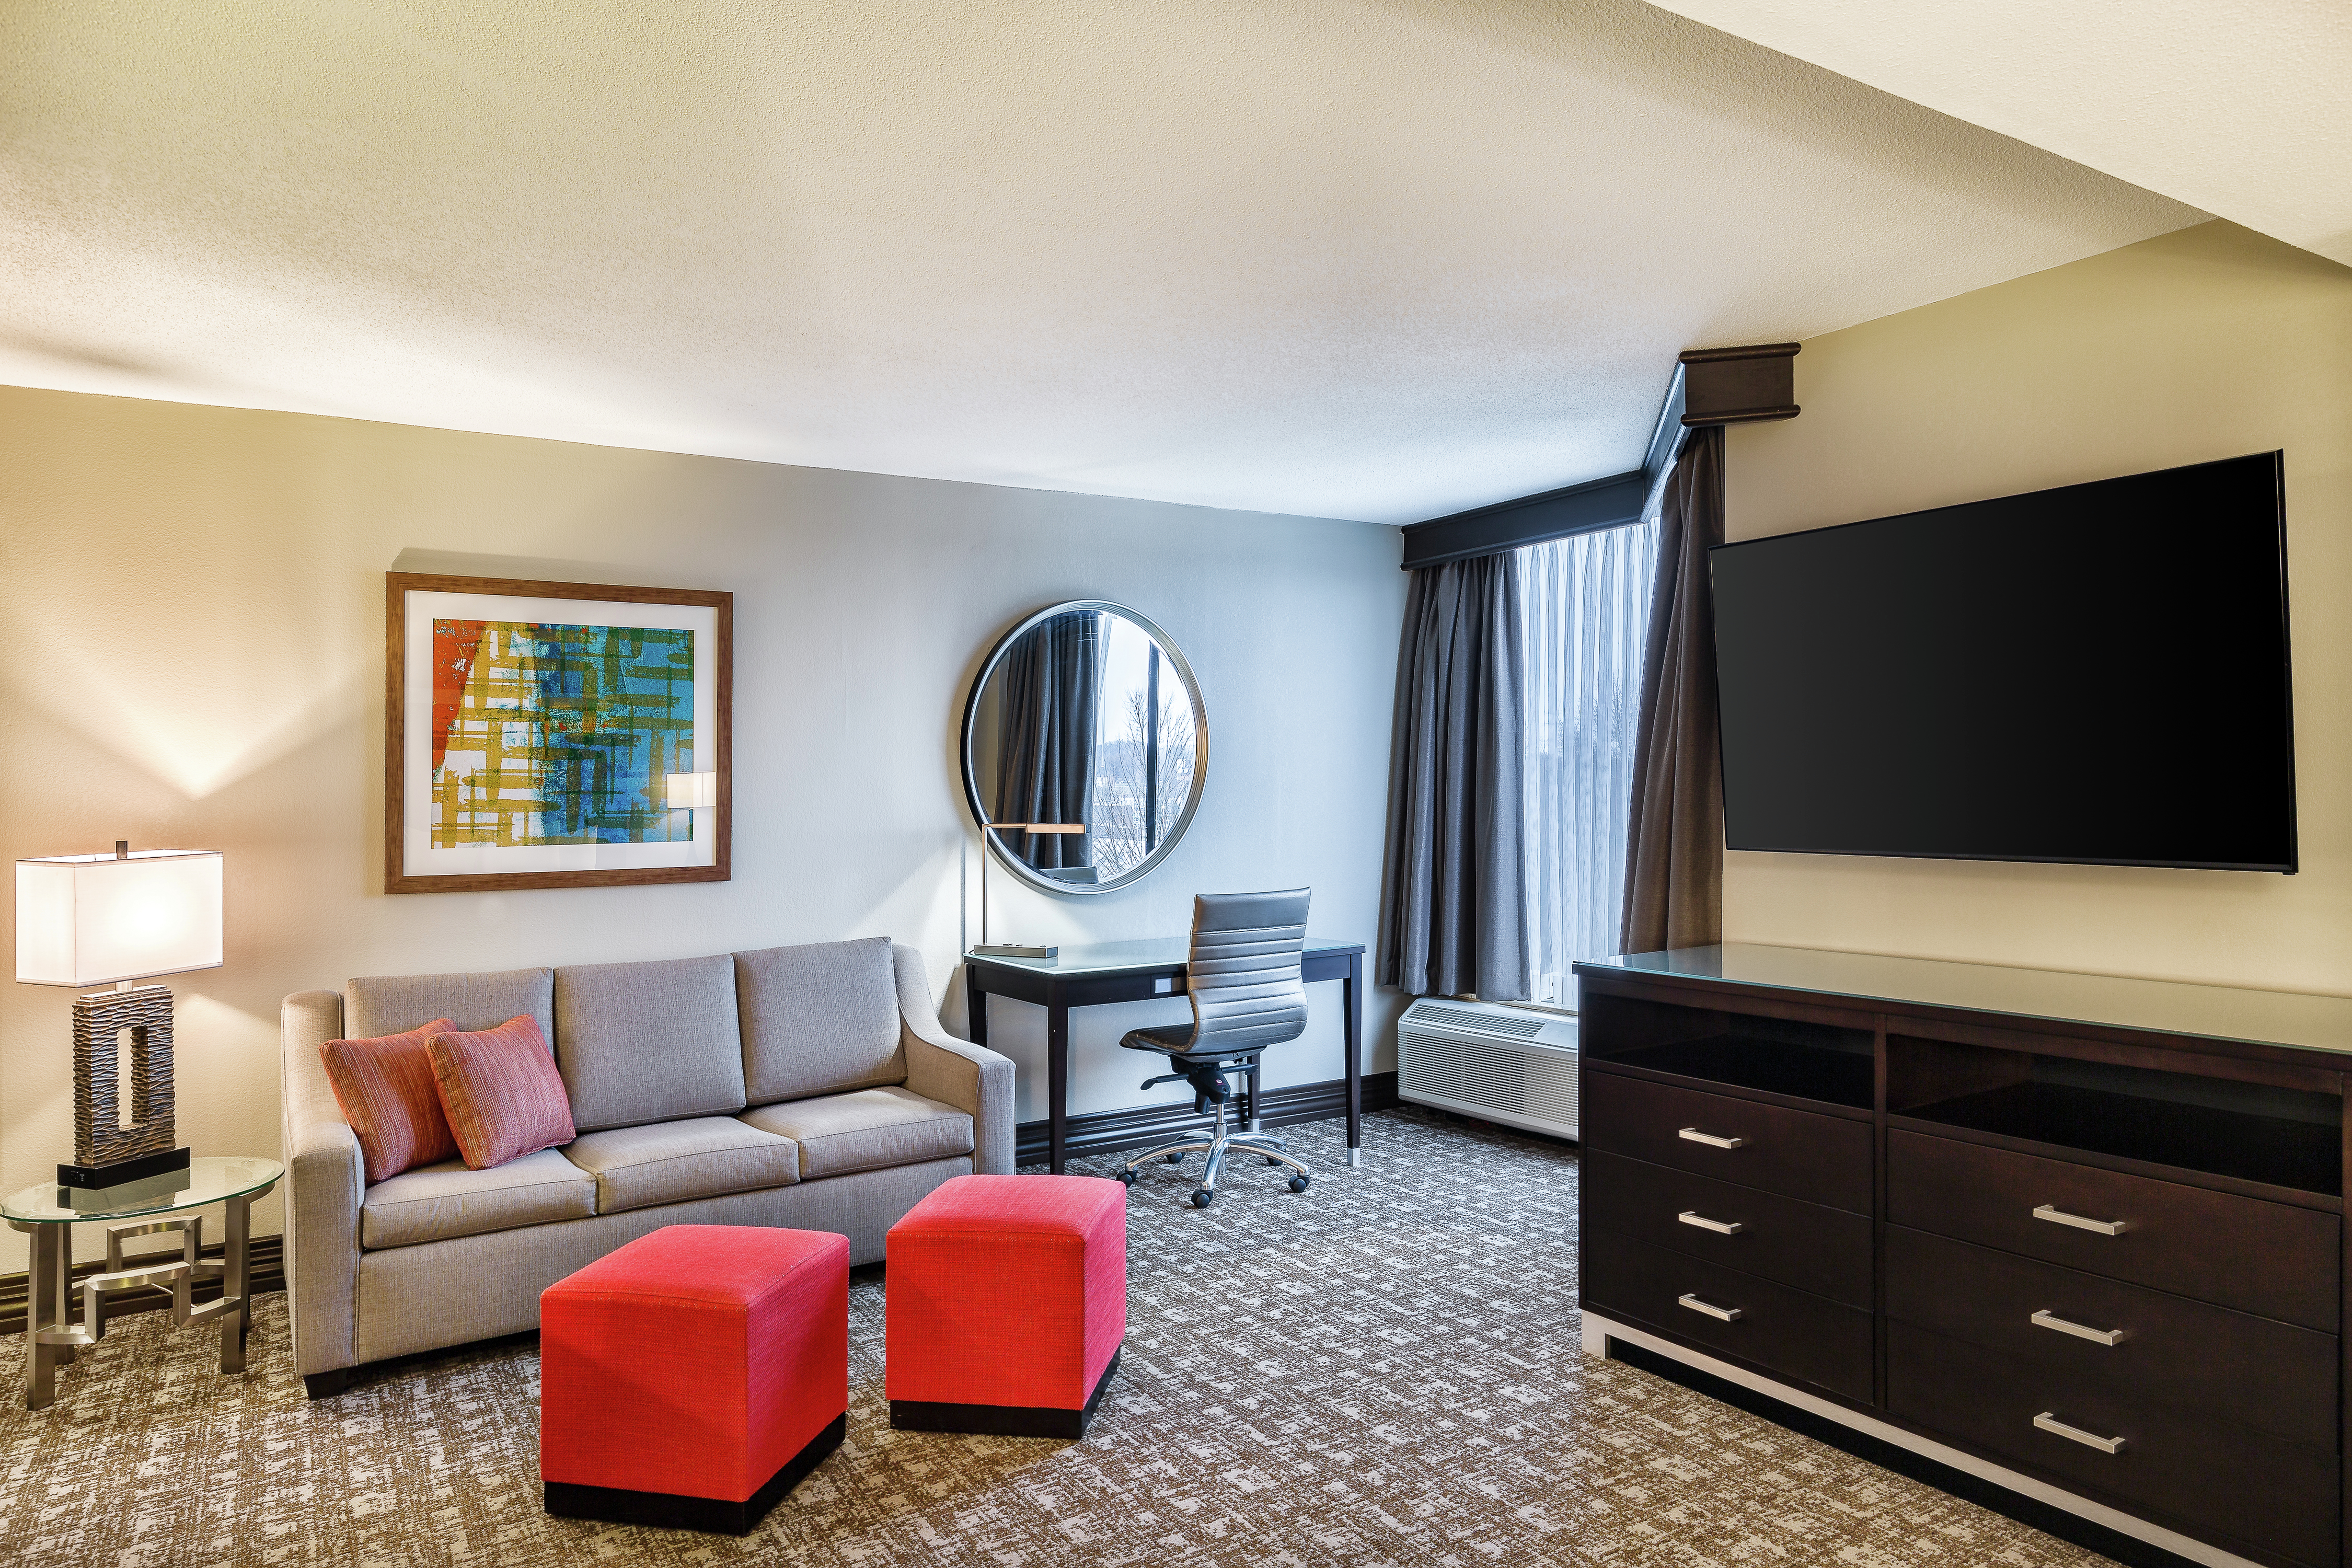 King Junior Suite with Lounge Area, Work Desk, and Room Technology